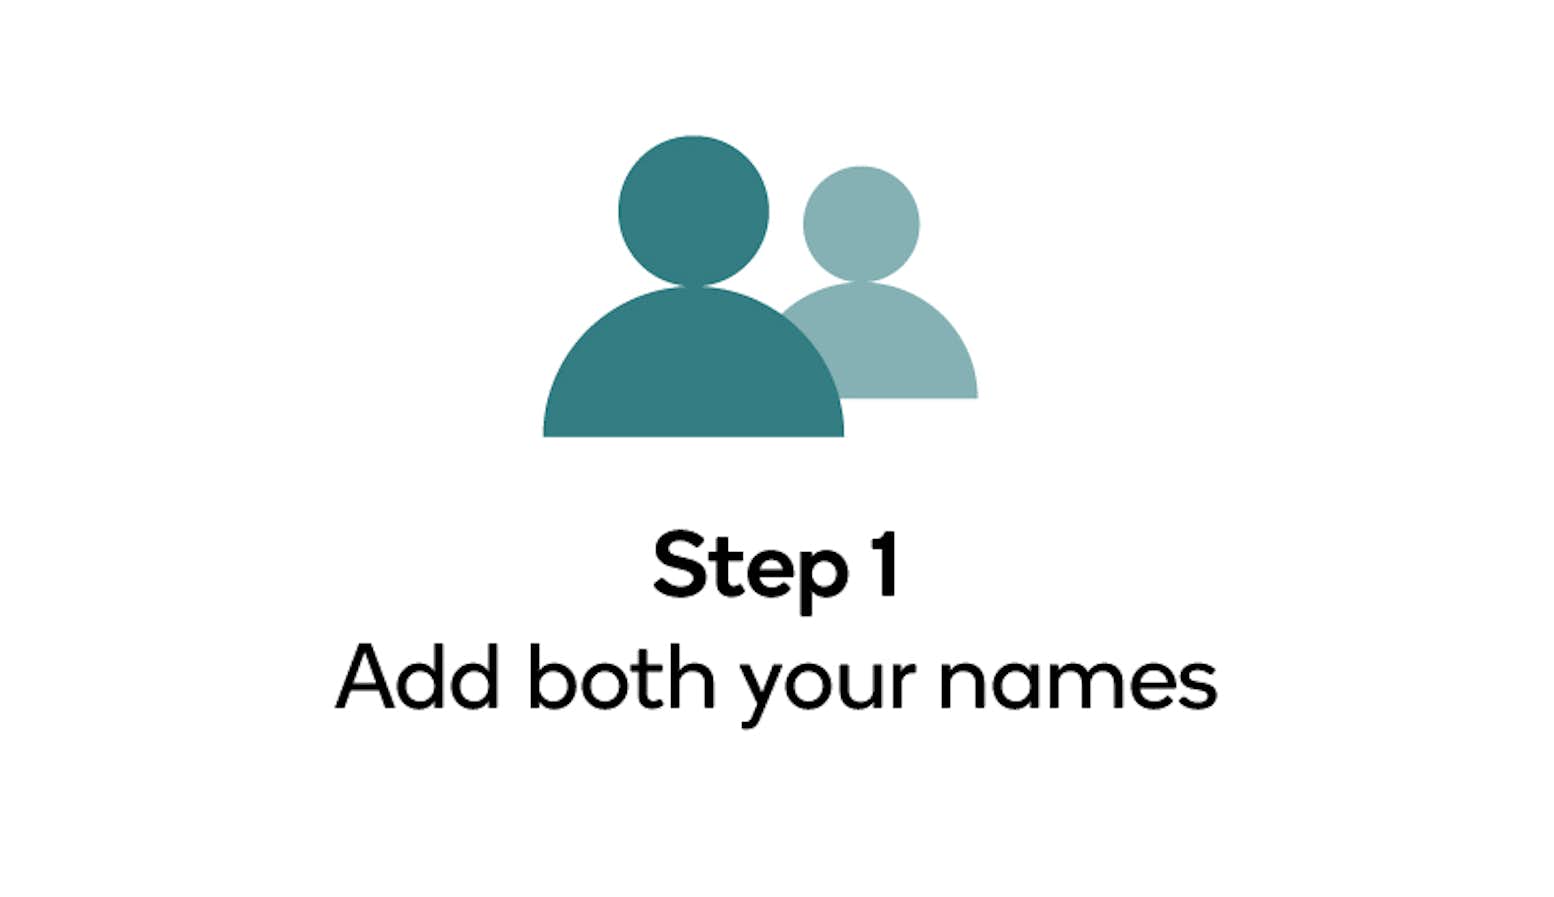 Add both your names